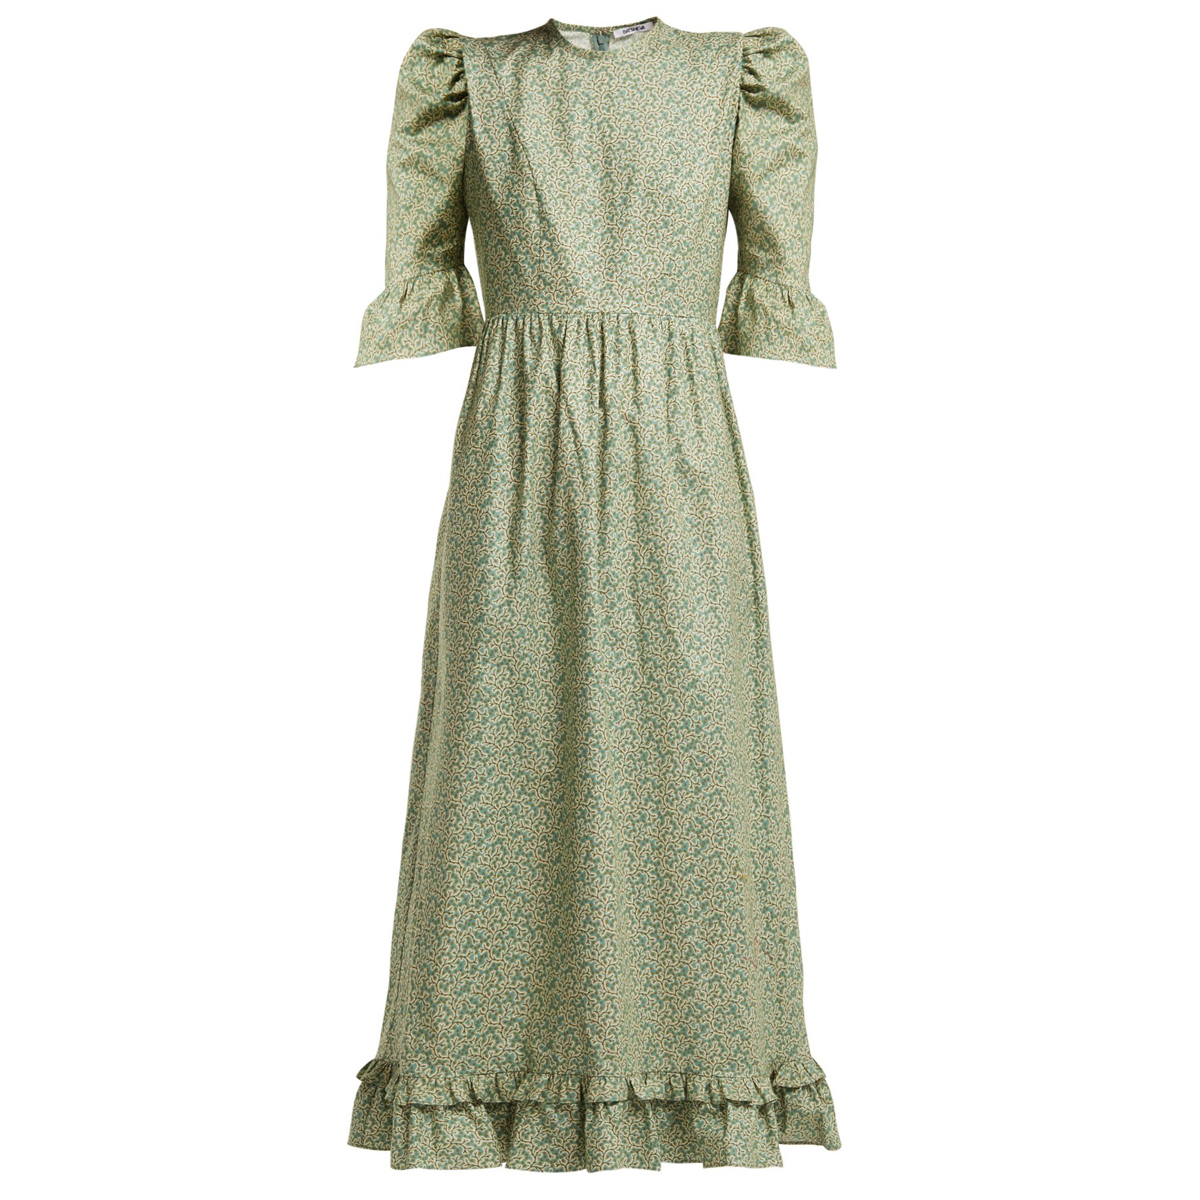 old fashioned style dresses